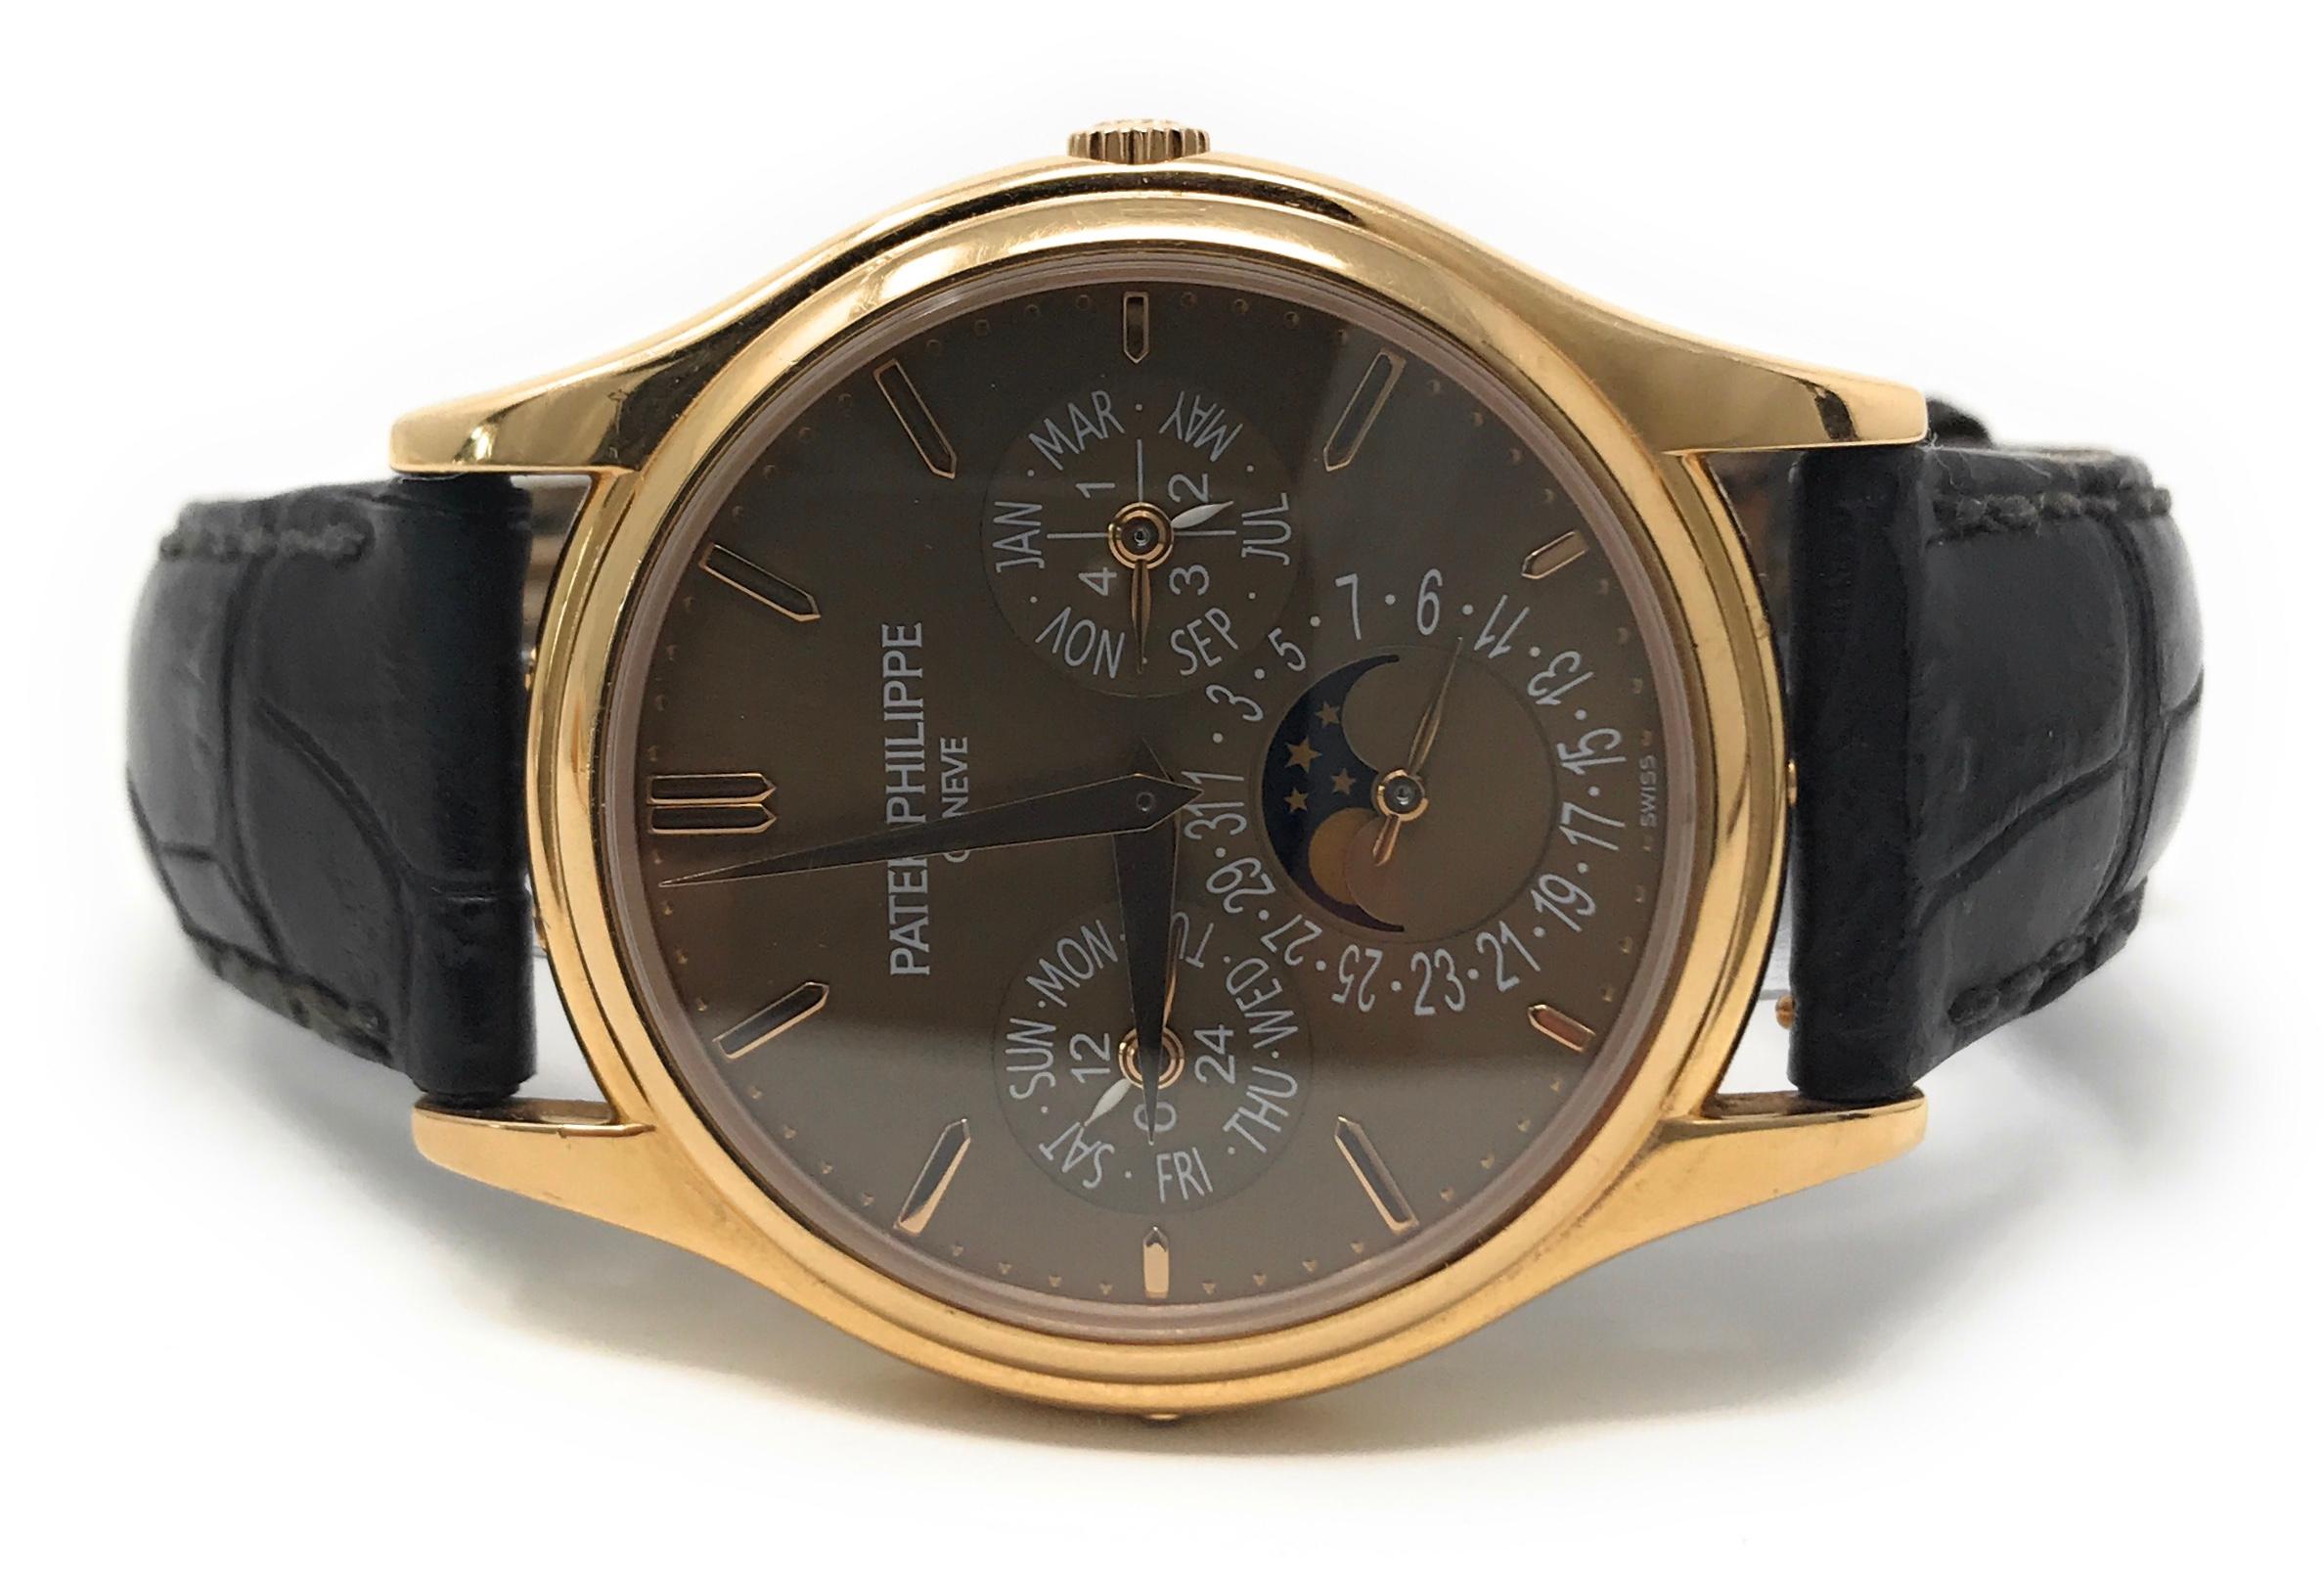 Patek Philippe 5140R Grand Complications Perpetual Calendar Watch In Good Condition For Sale In Los Angeles, CA